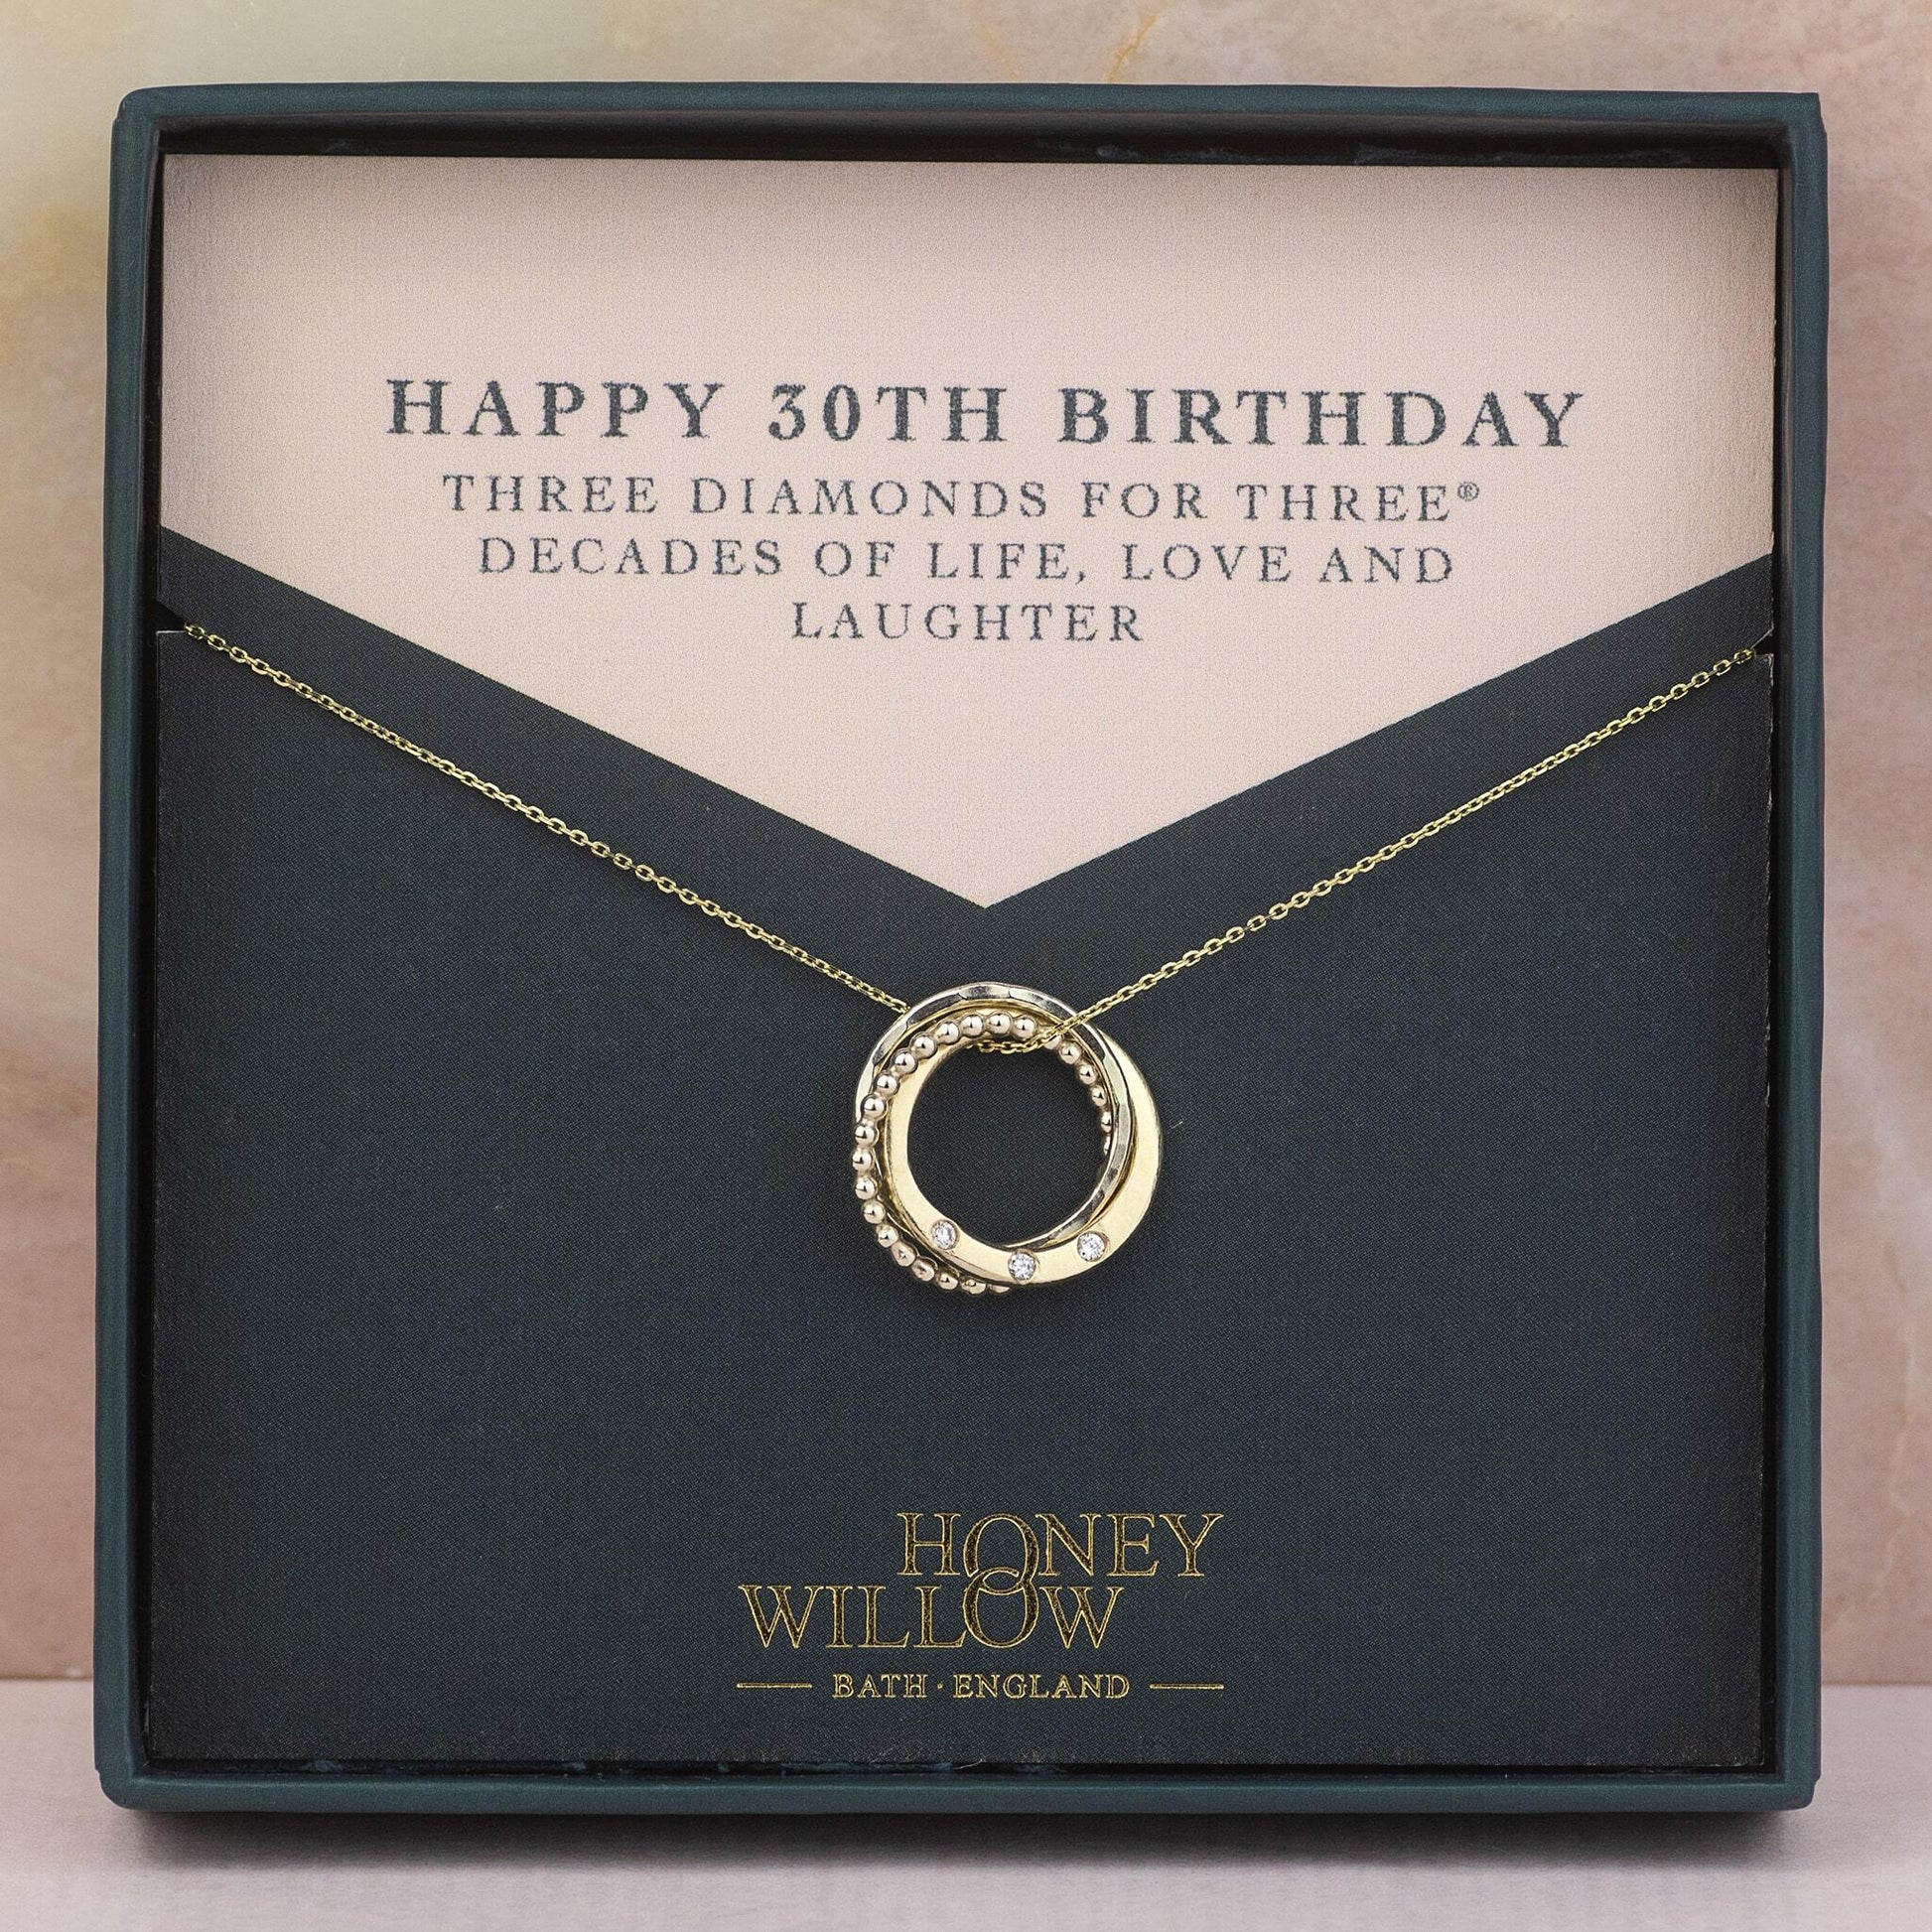 9kt 30th Birthday Necklace - 3 Diamonds for 3 Decades Necklace - Recycled Gold